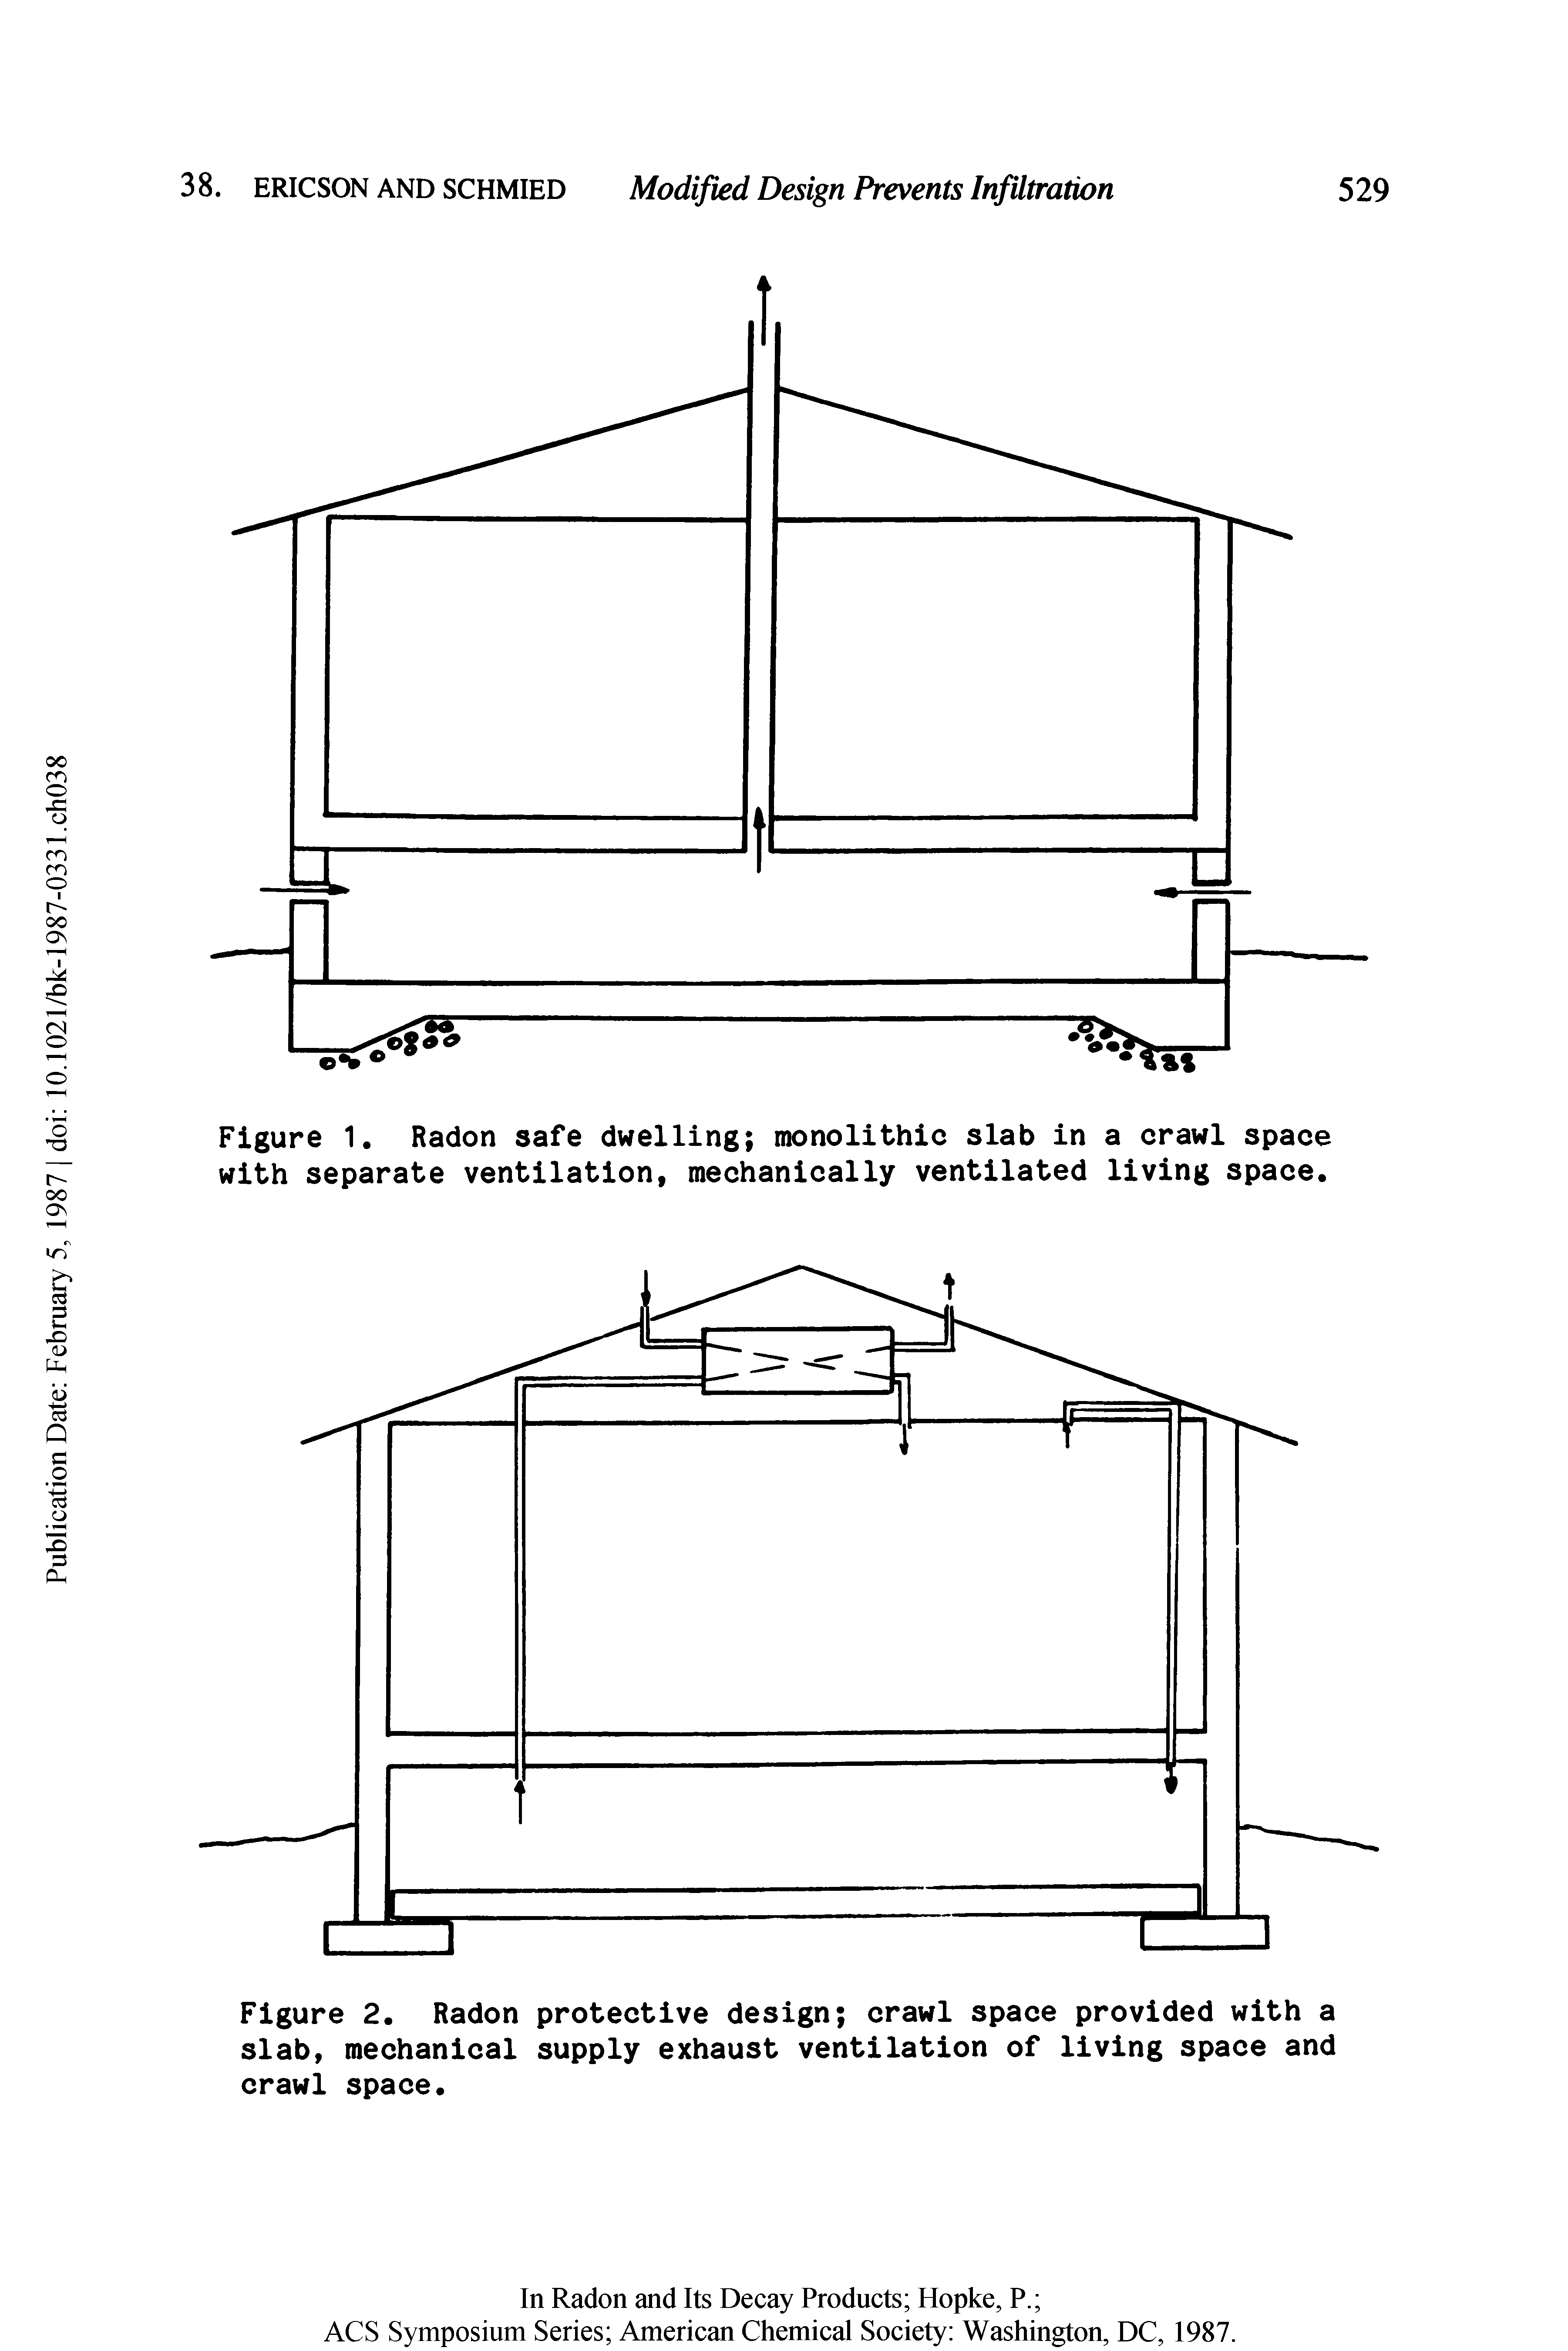 Figure 2. Radon protective design crawl space provided with a slab, mechanical supply exhaust ventilation of living space and crawl space.